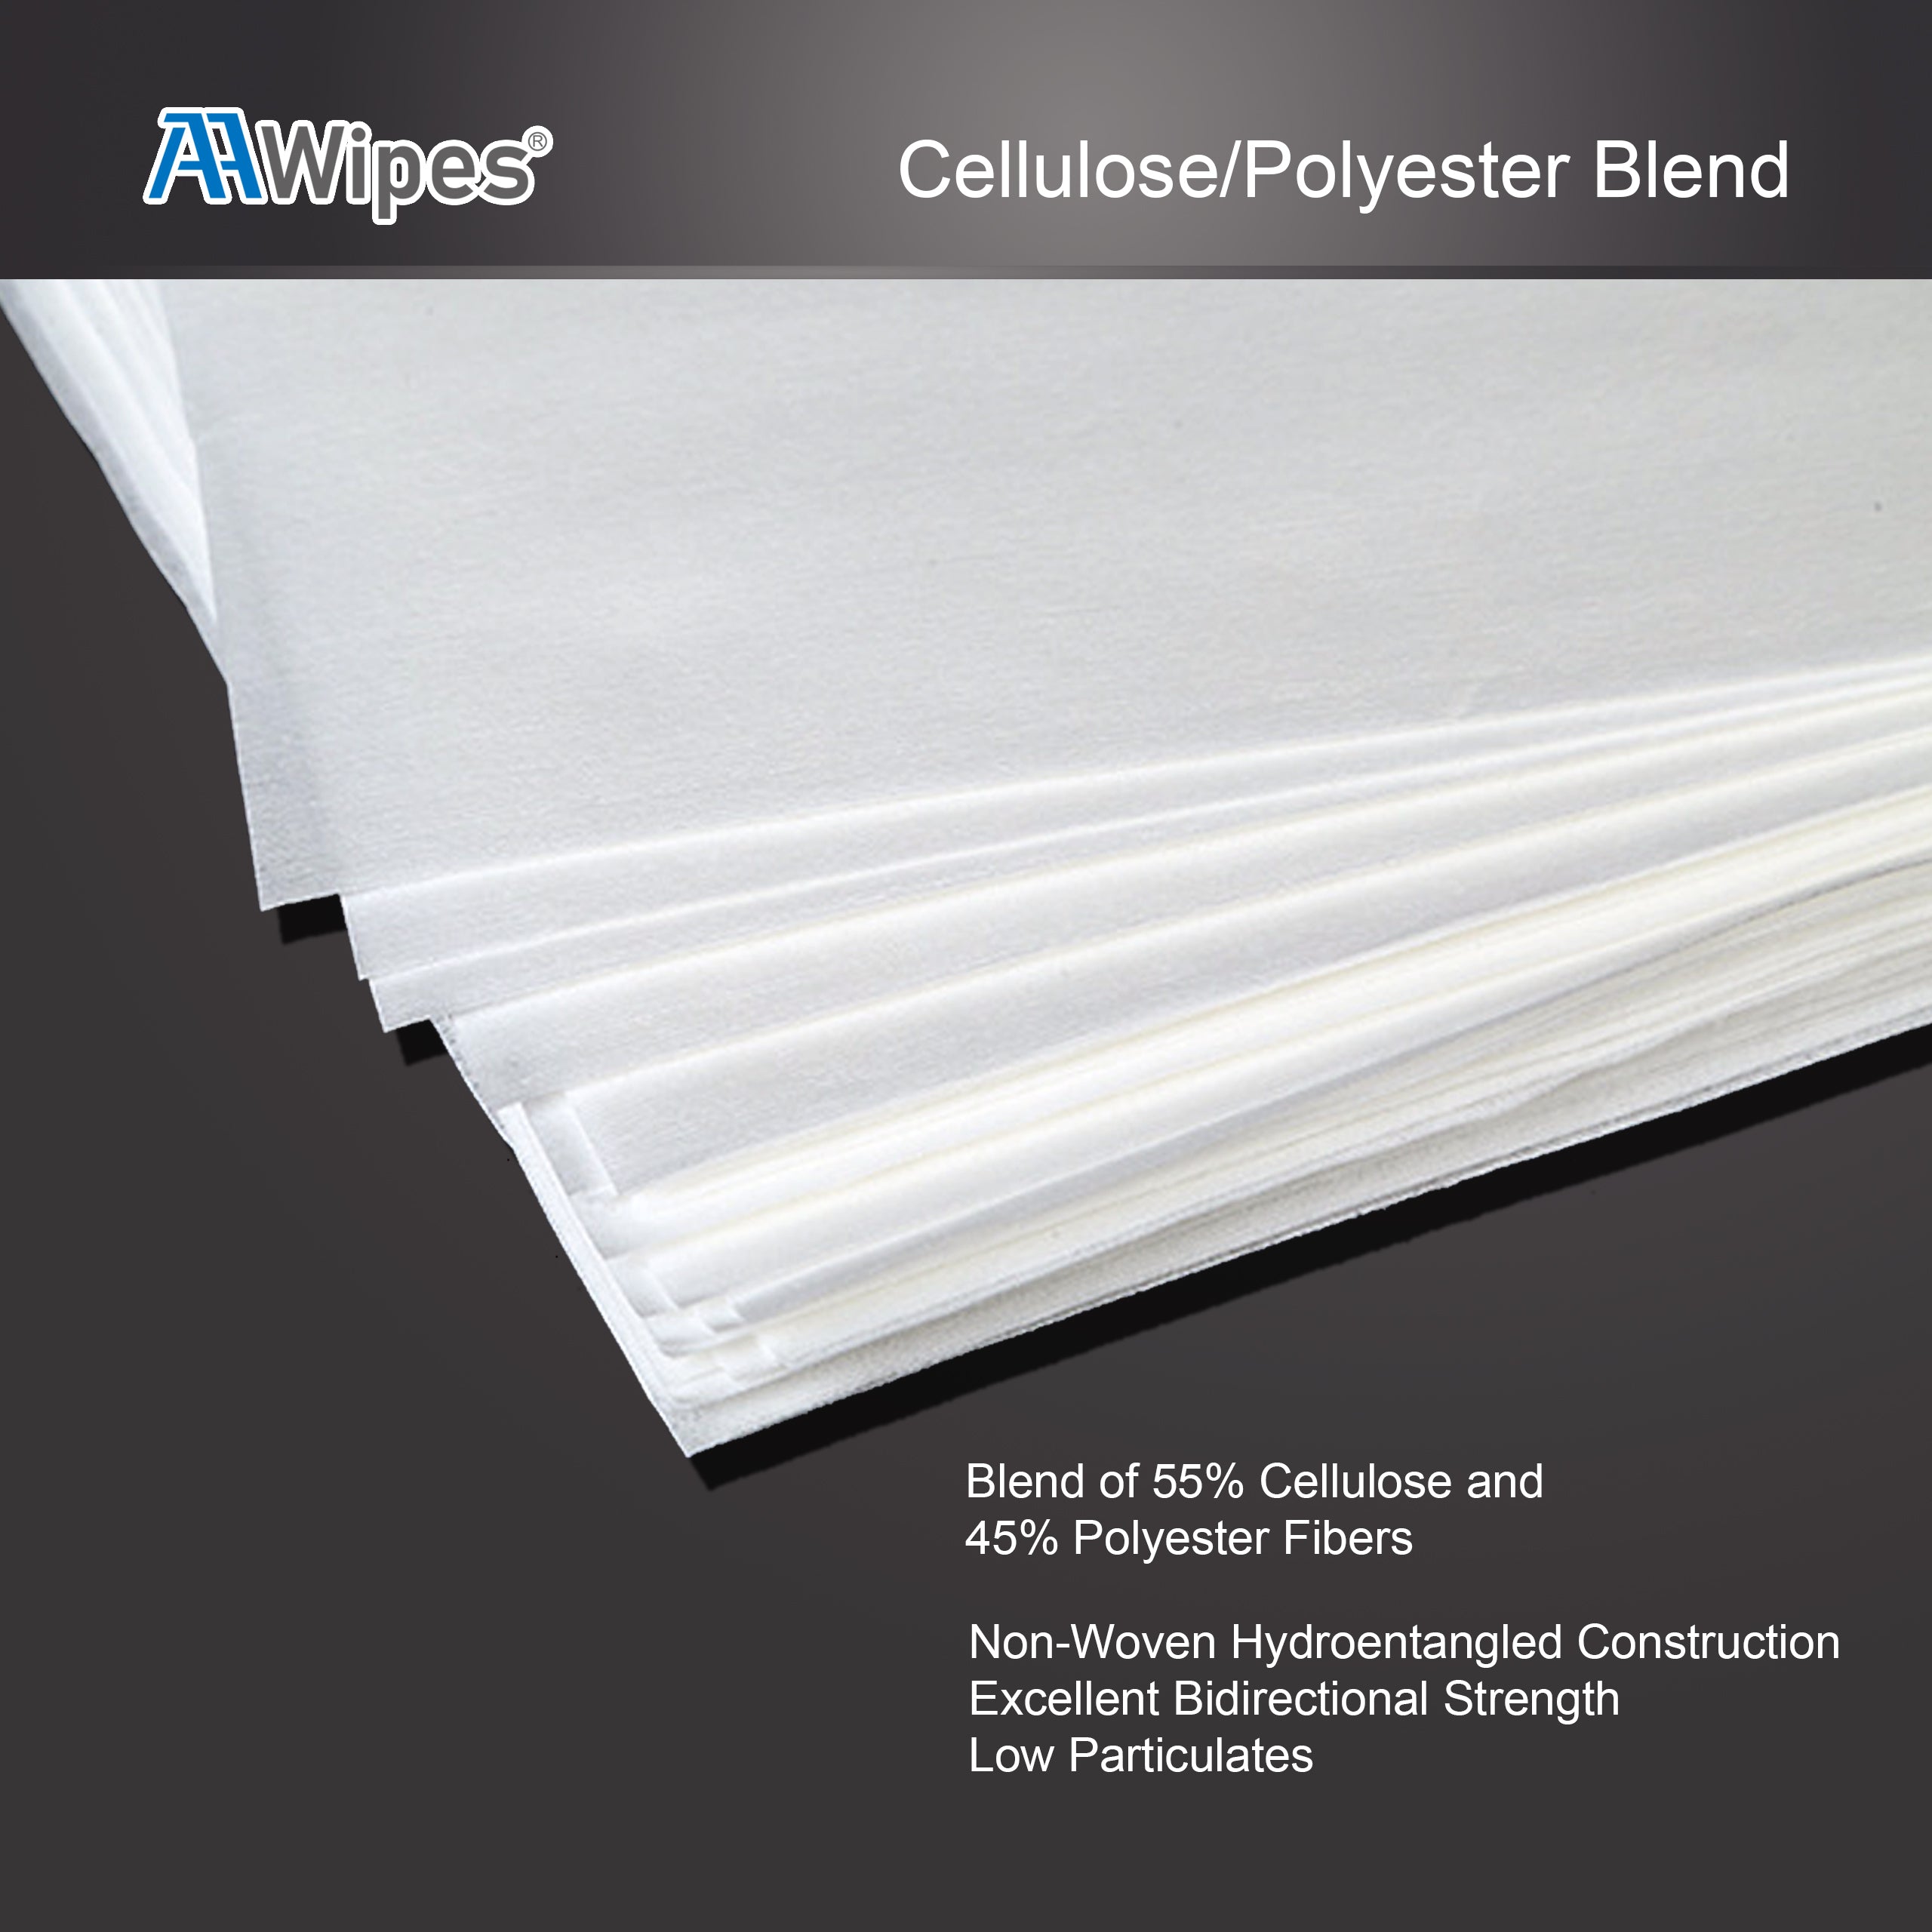 Cleanroom Wipers Nonwoven 9"x9" Cellulose/Polyester Blend Disposable Wipes for Lab, Food Service, Automotive, Printing and Semiconductor Industries. Starts with 4,200 wipes/box in 14 bags (No. NW06809).